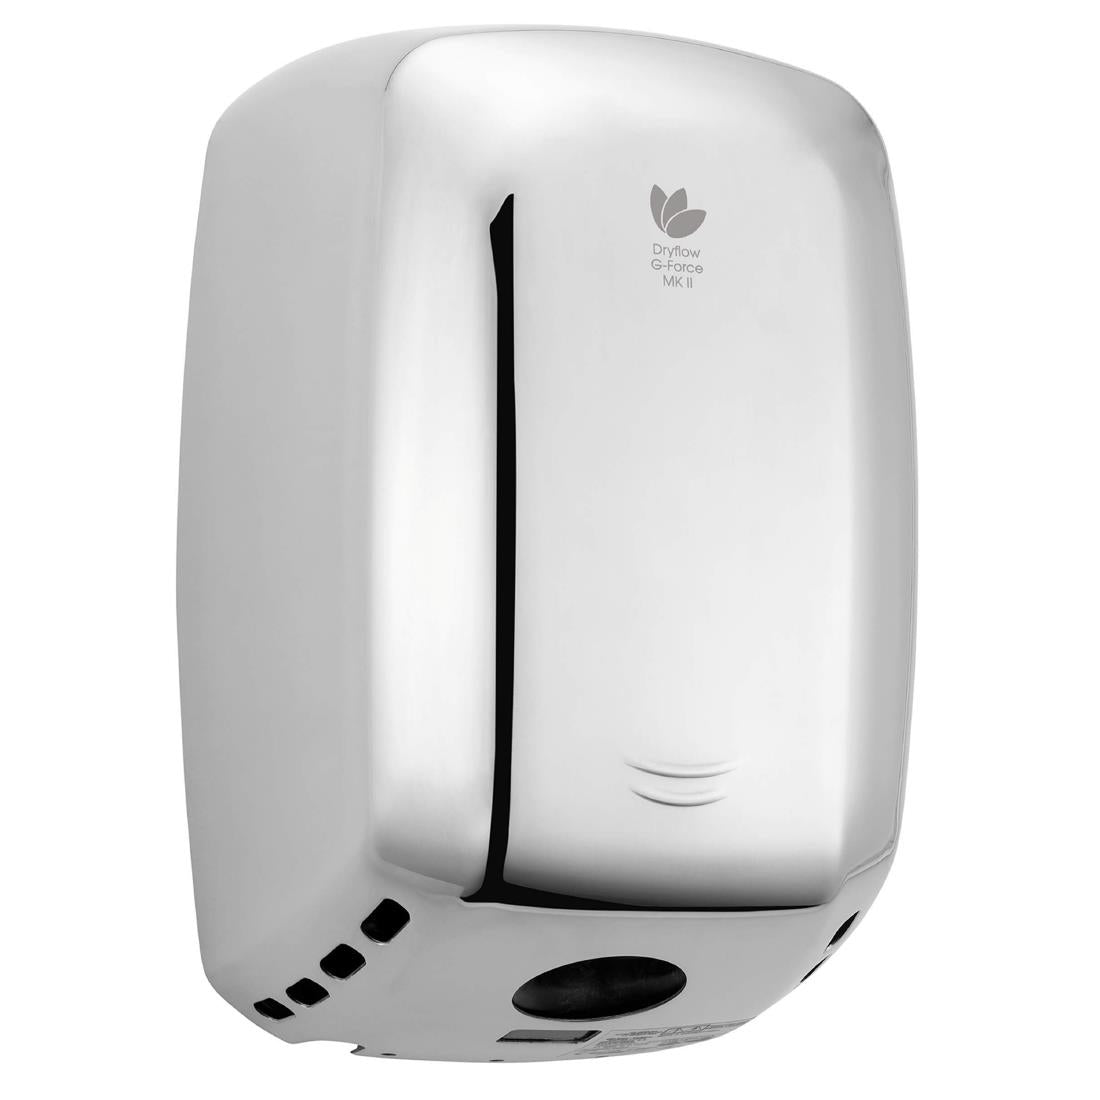 HP923 Dryflow G-Force MKII Hand Dryer with HEPA Filter Polished Chrome